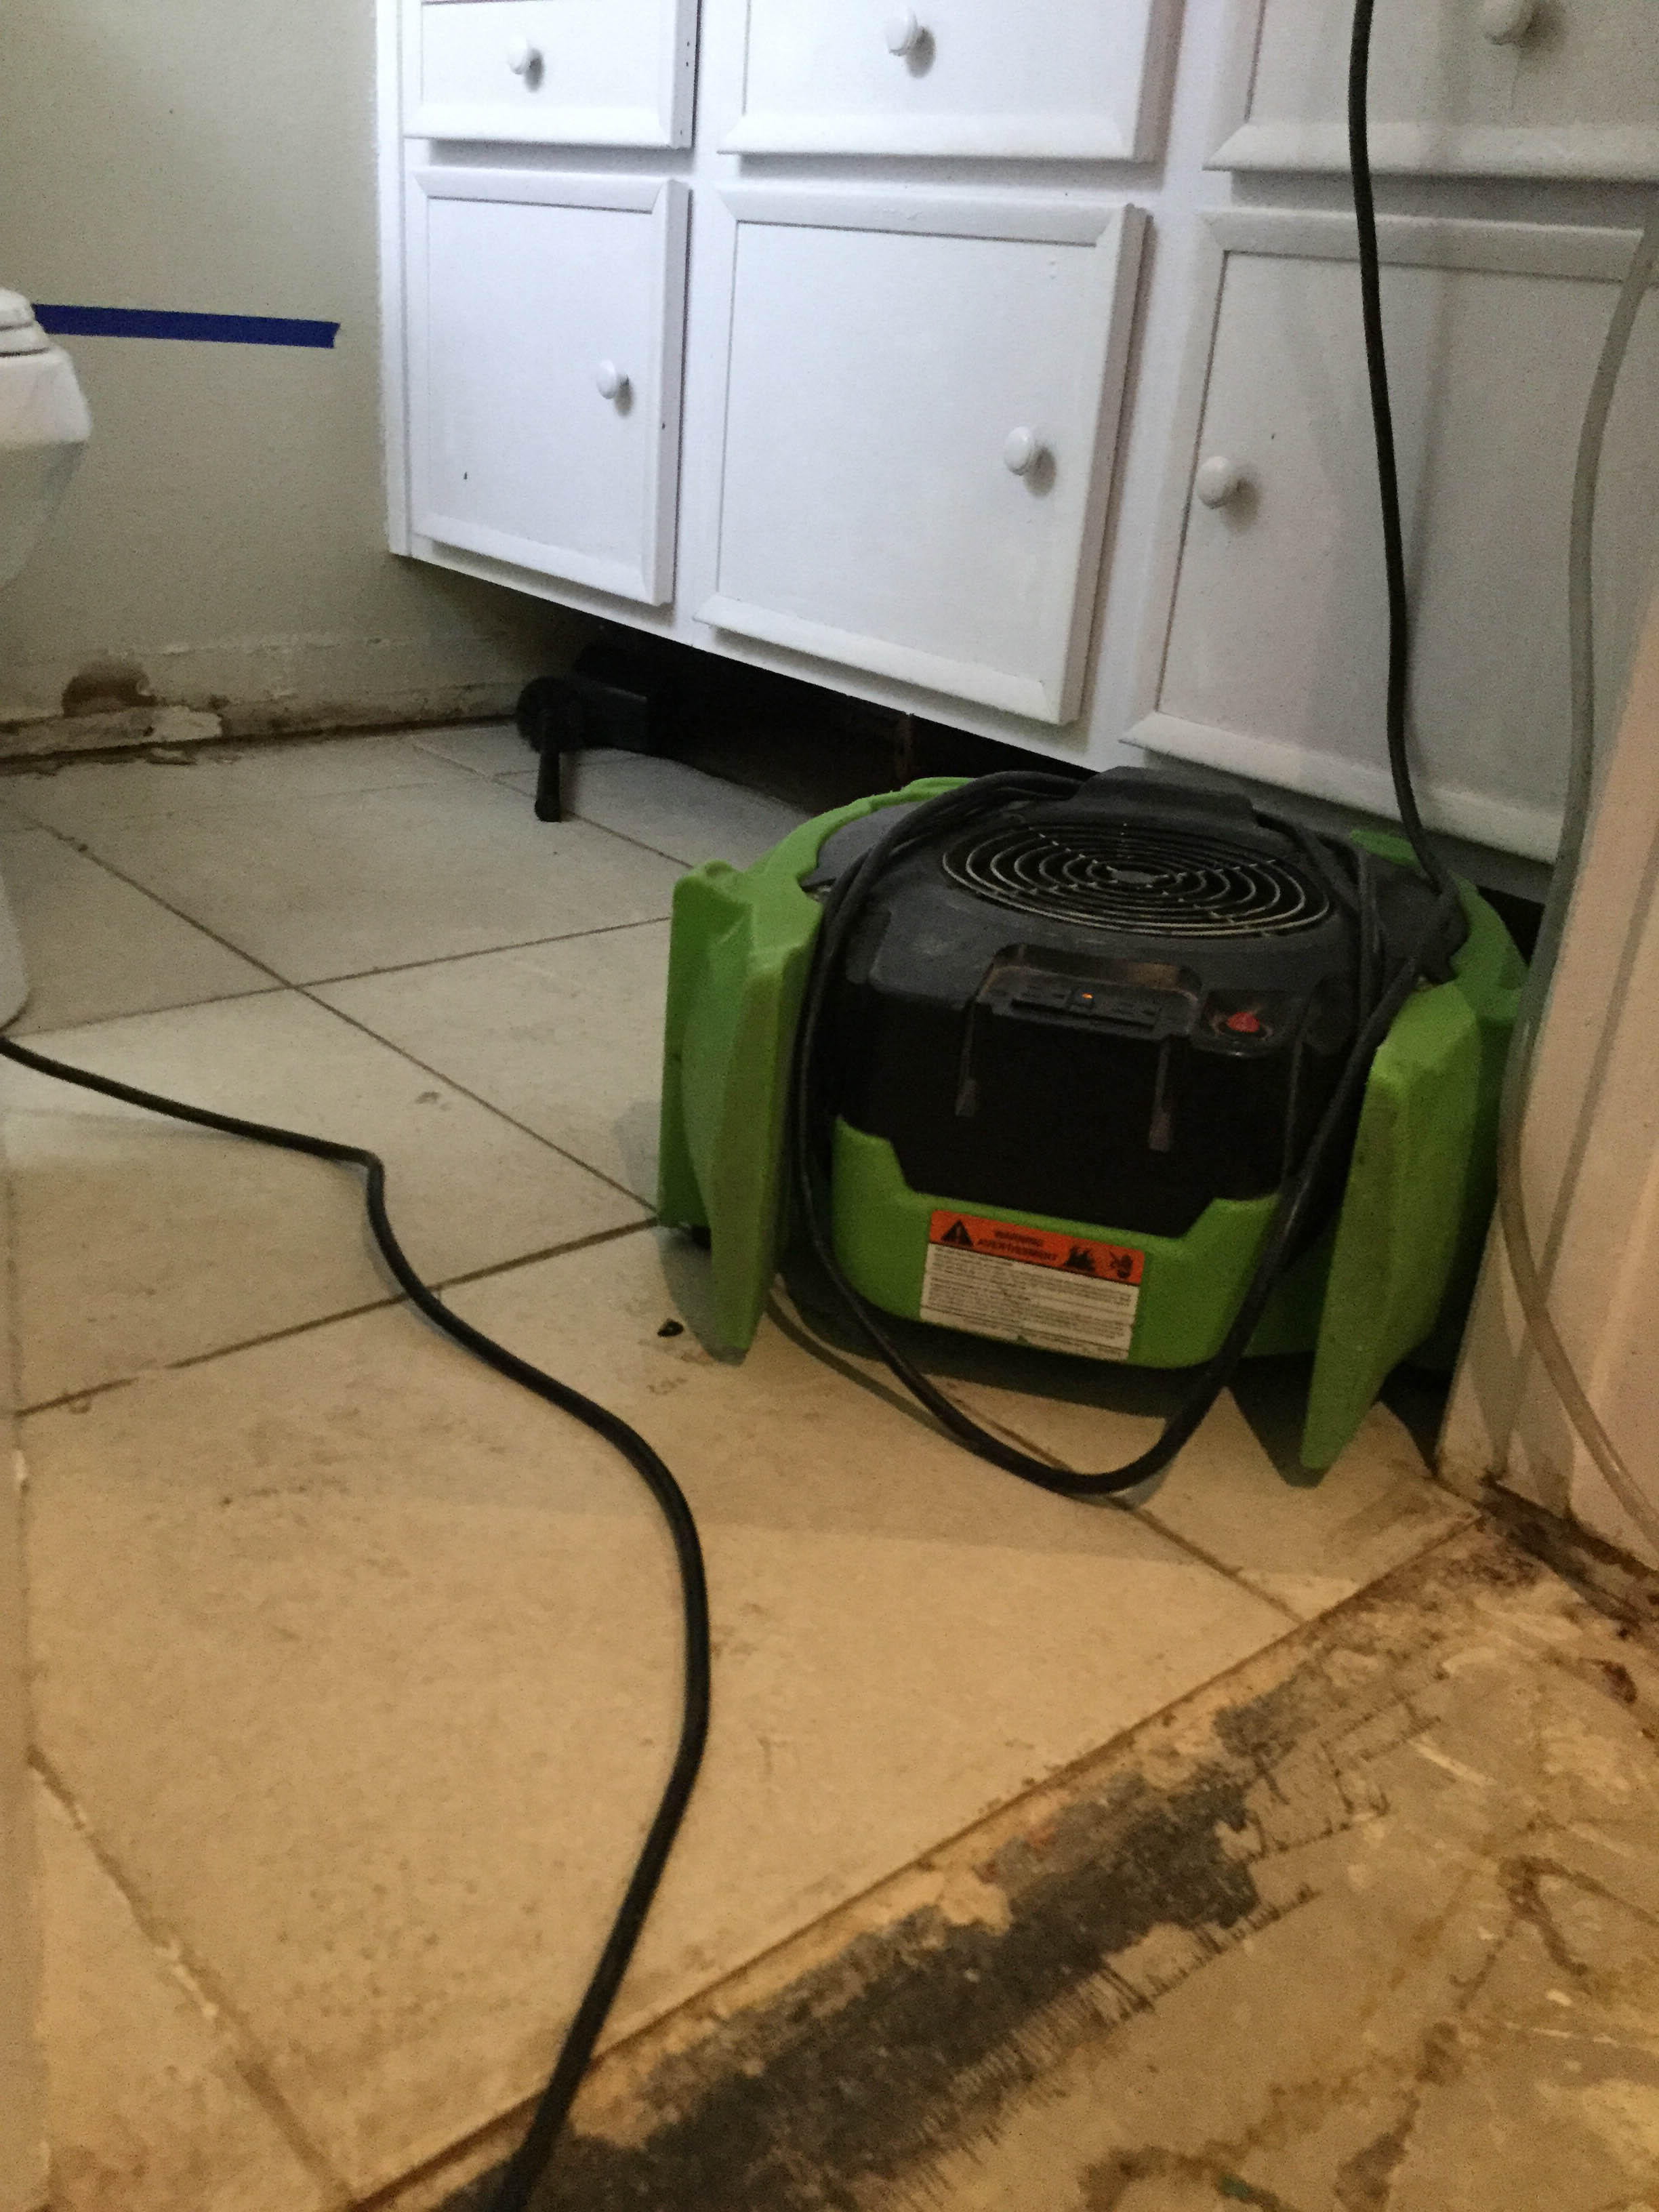 Need water extraction? Call SERVPRO of Laguna Beach / Dana Point, they are the experts on water damage